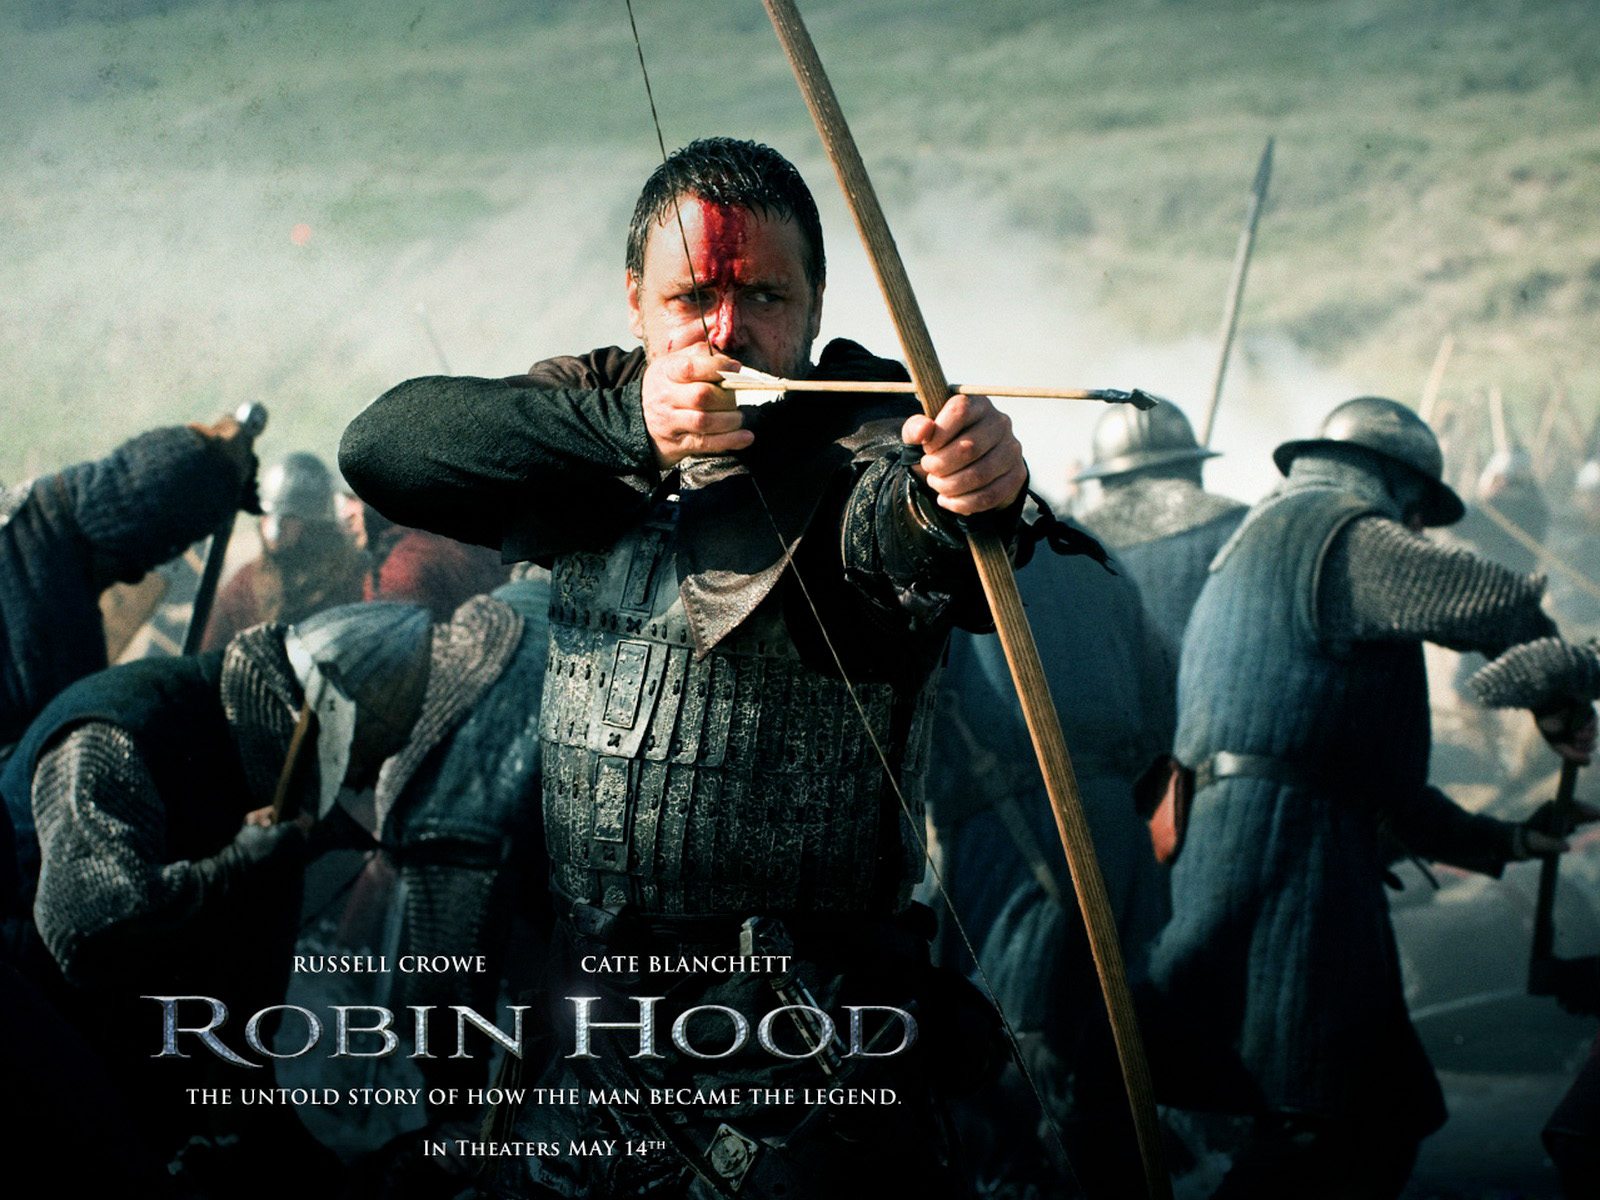 Robin Hood movie 2010 wallpapers and images - wallpapers ...